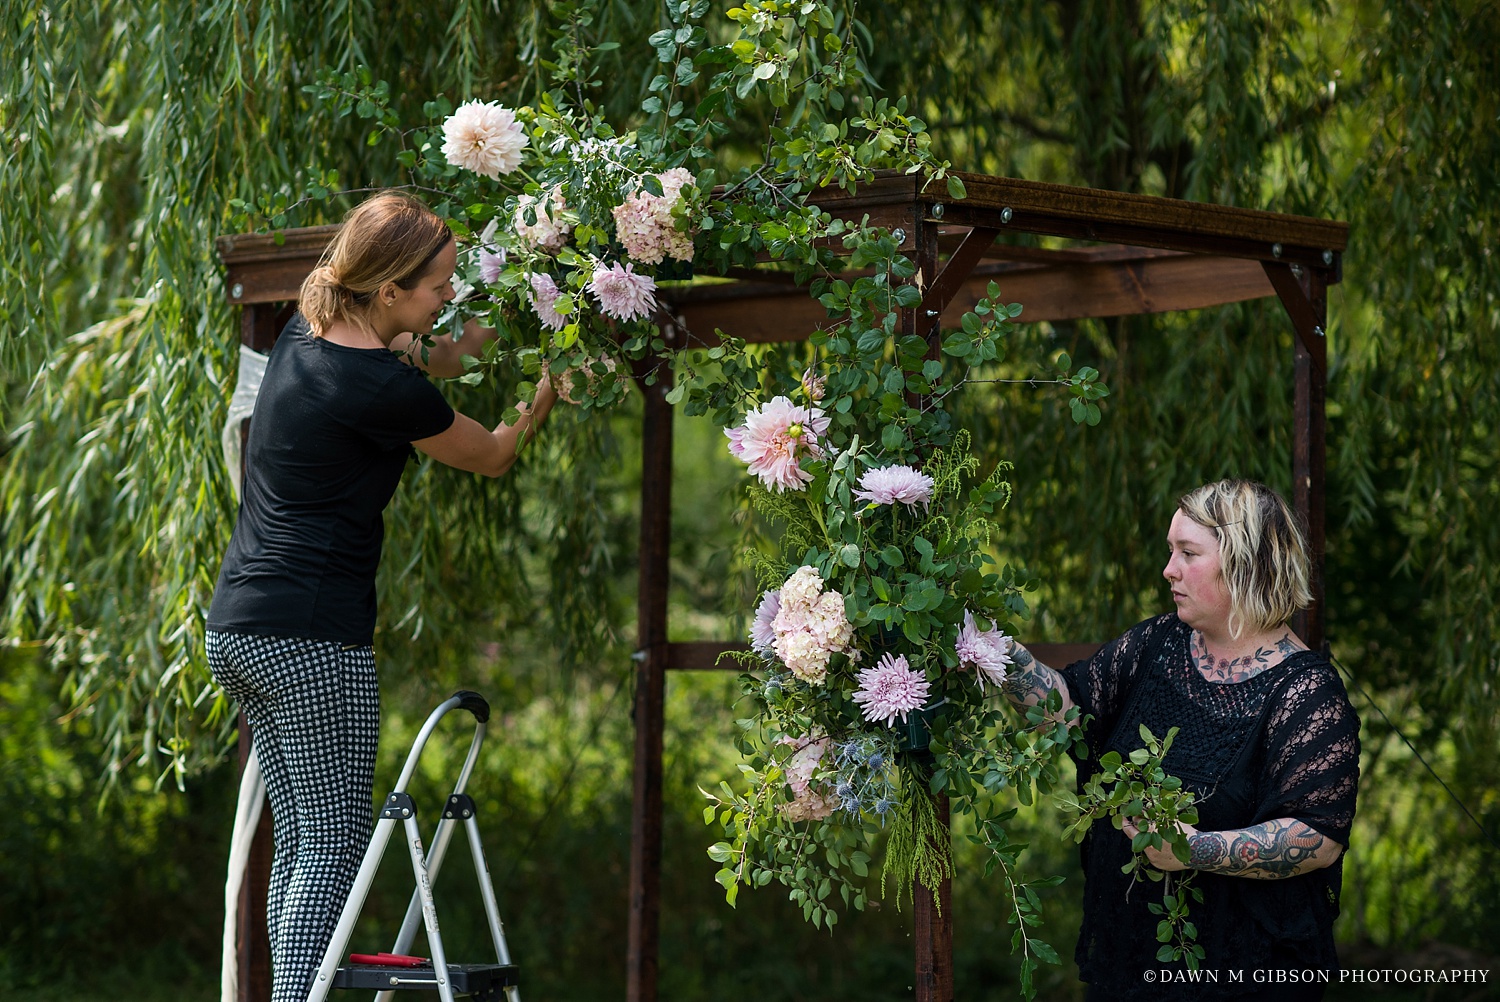 William's Florist Behind-The-Scenes with Dawn M Gibson Photography